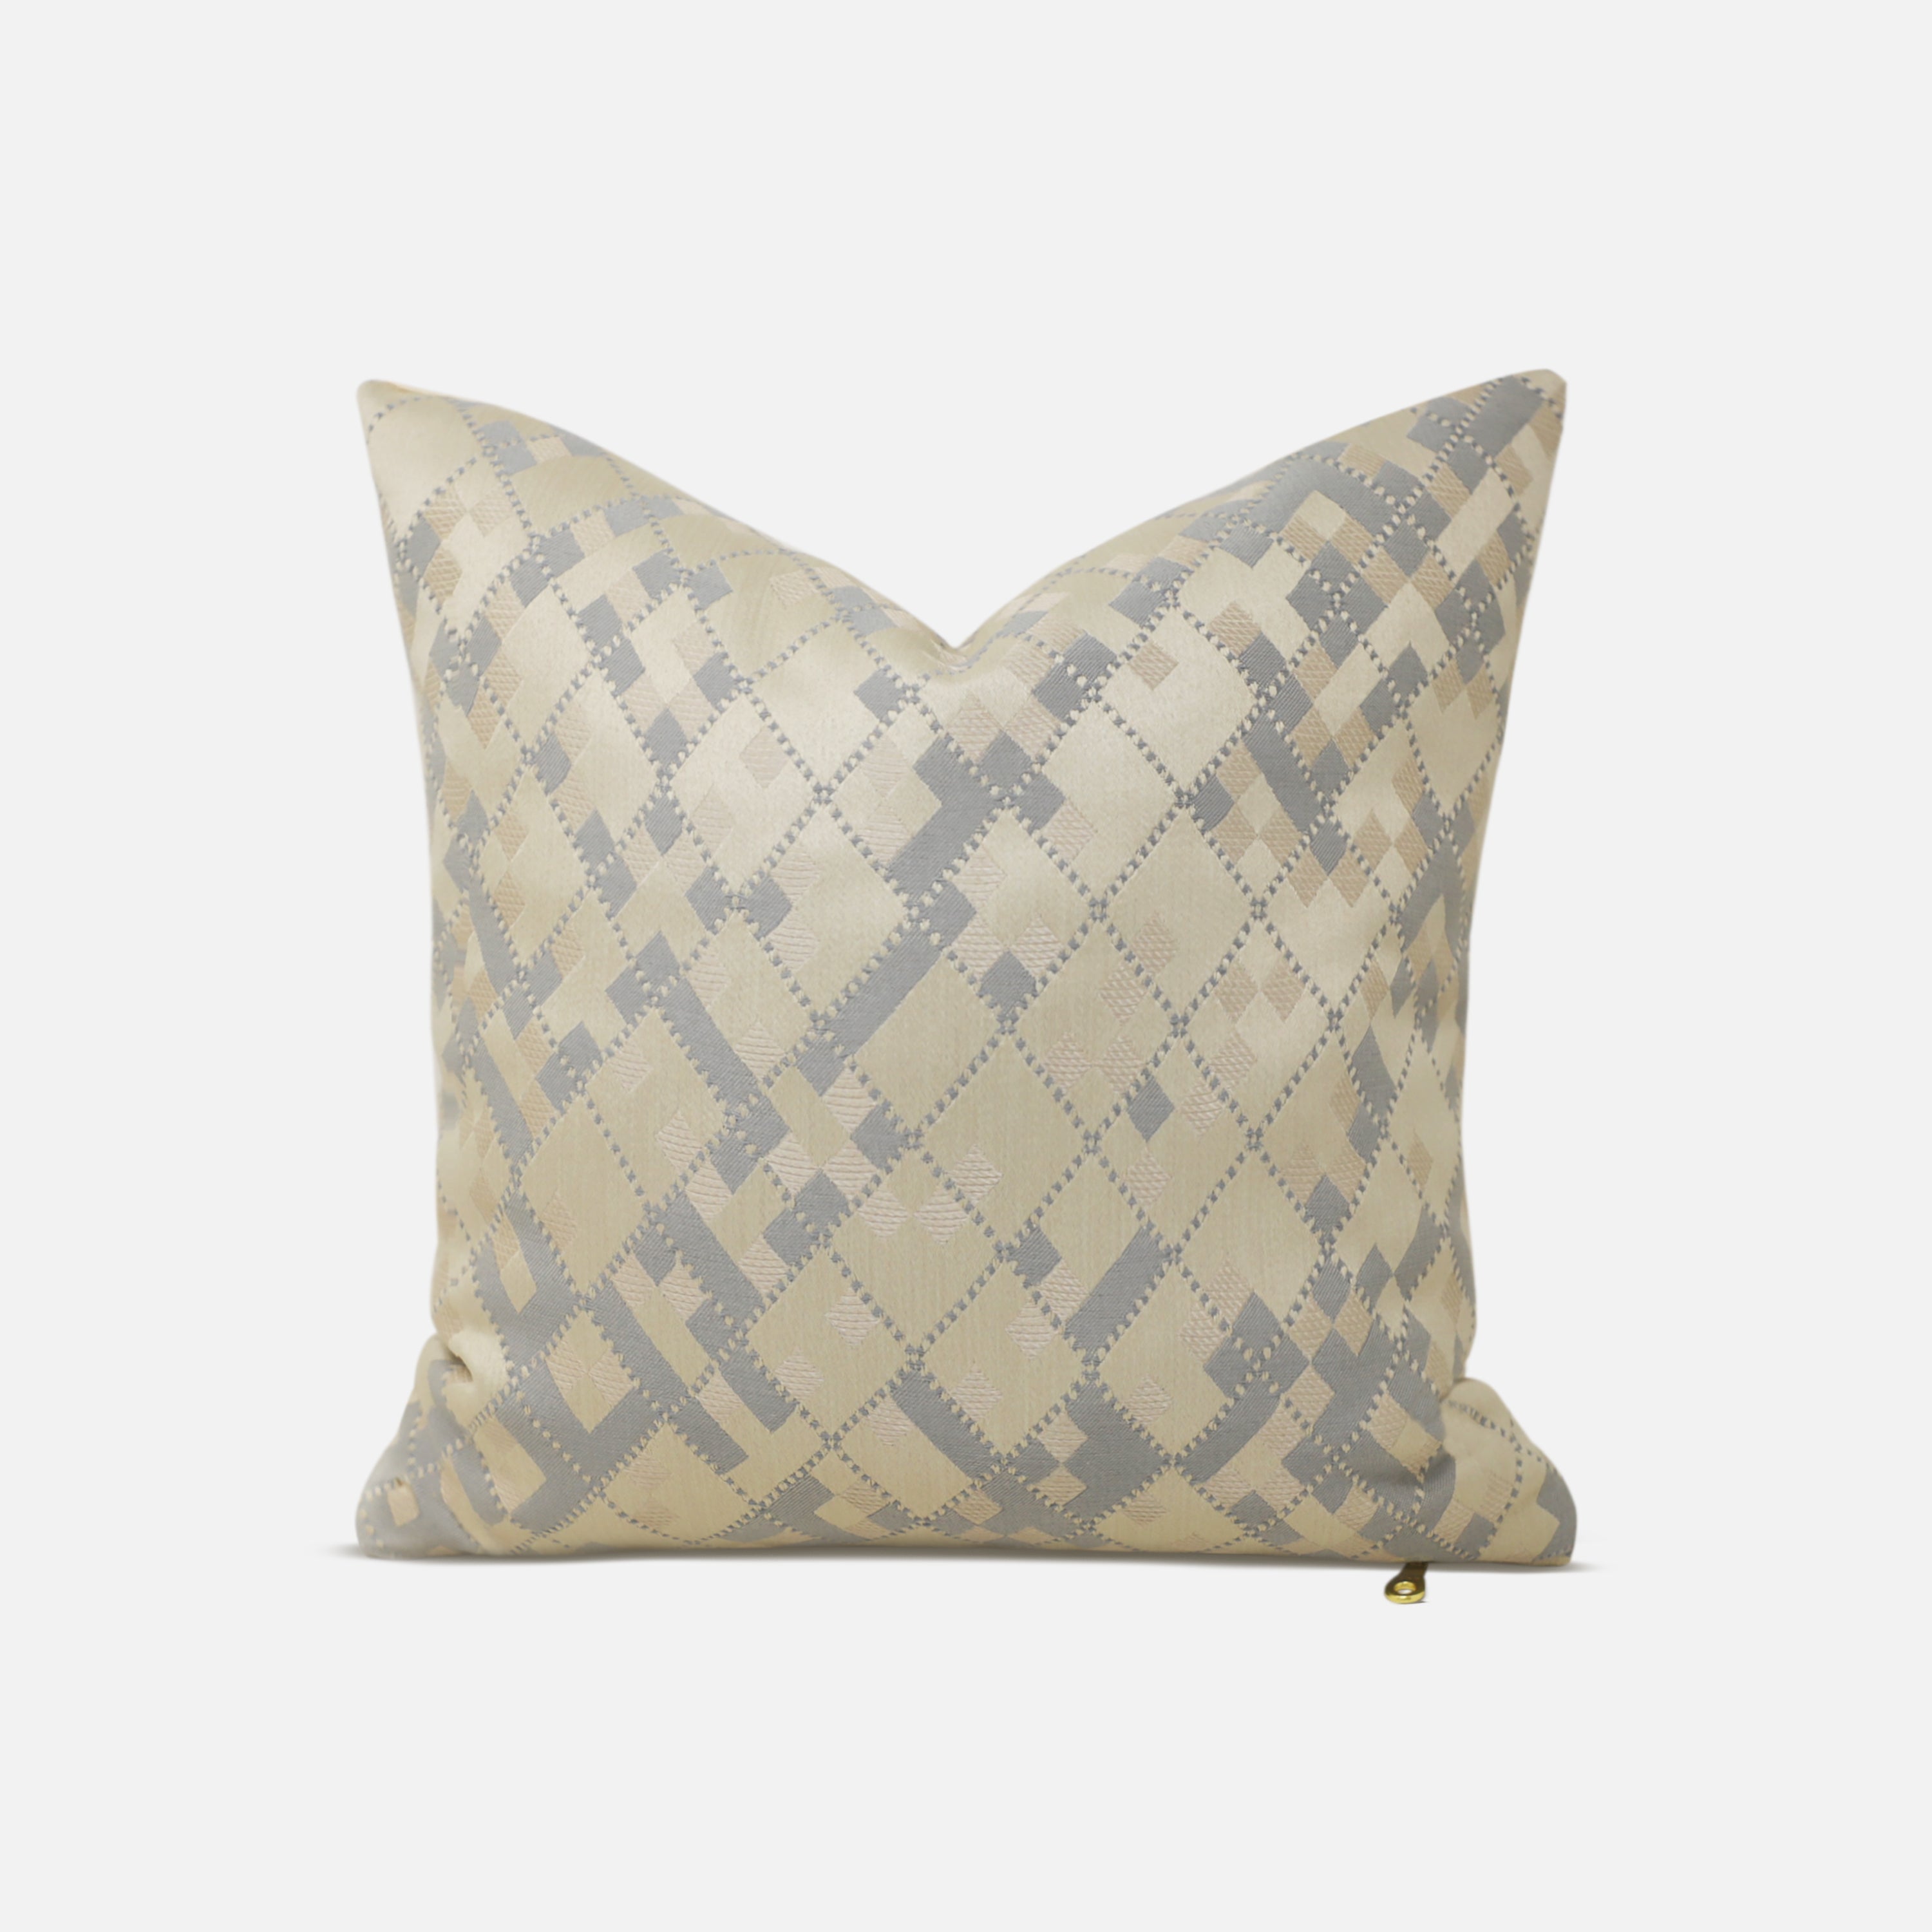 Woven Stories Collection - Beige Geometric Throw Pillow